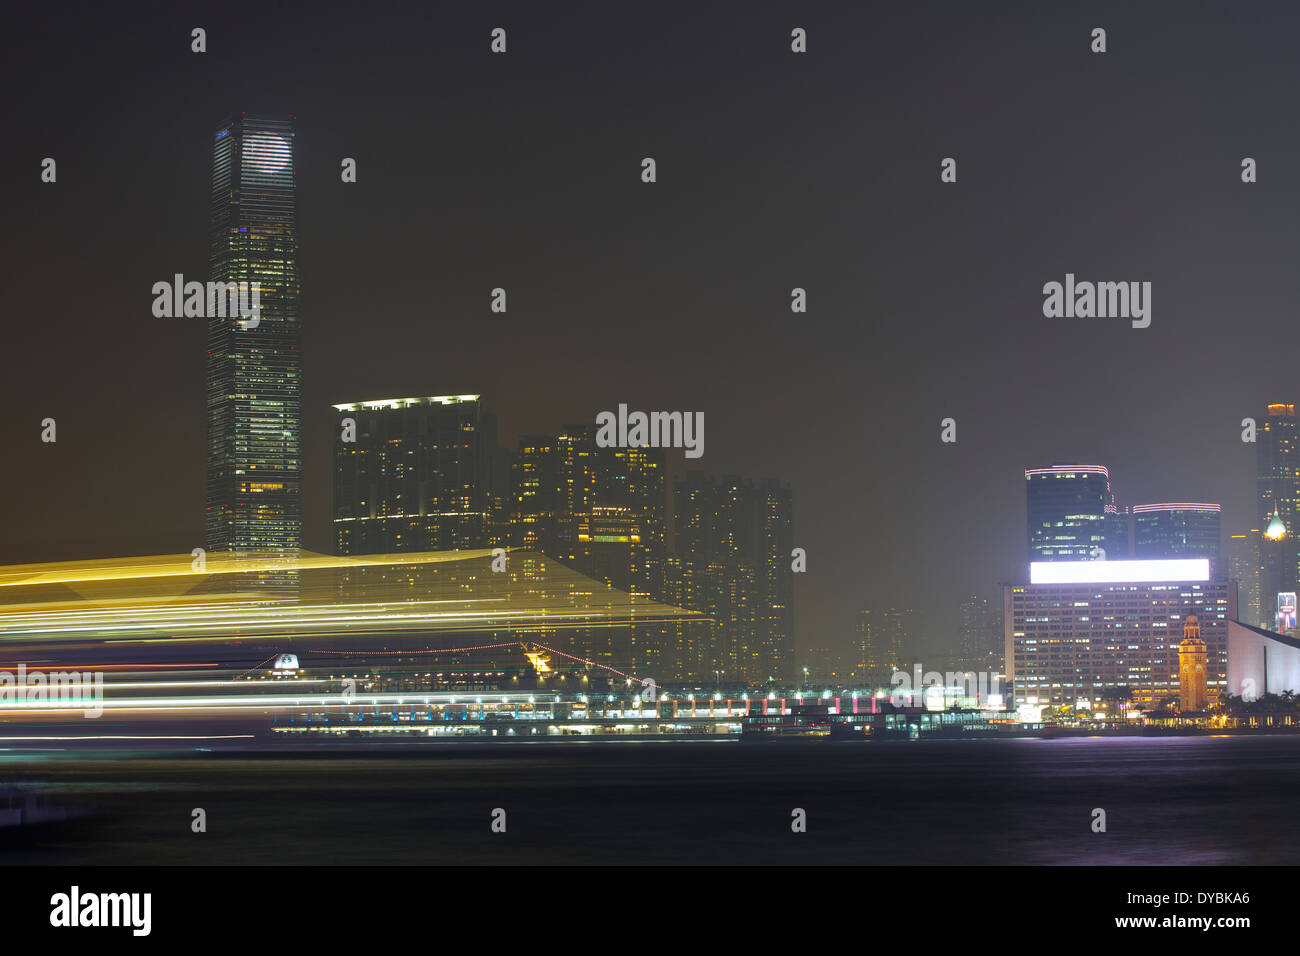 Motion Blur Of A Ship Passing in the Night, Victoria Harbour, Hong Kong. Stock Photo